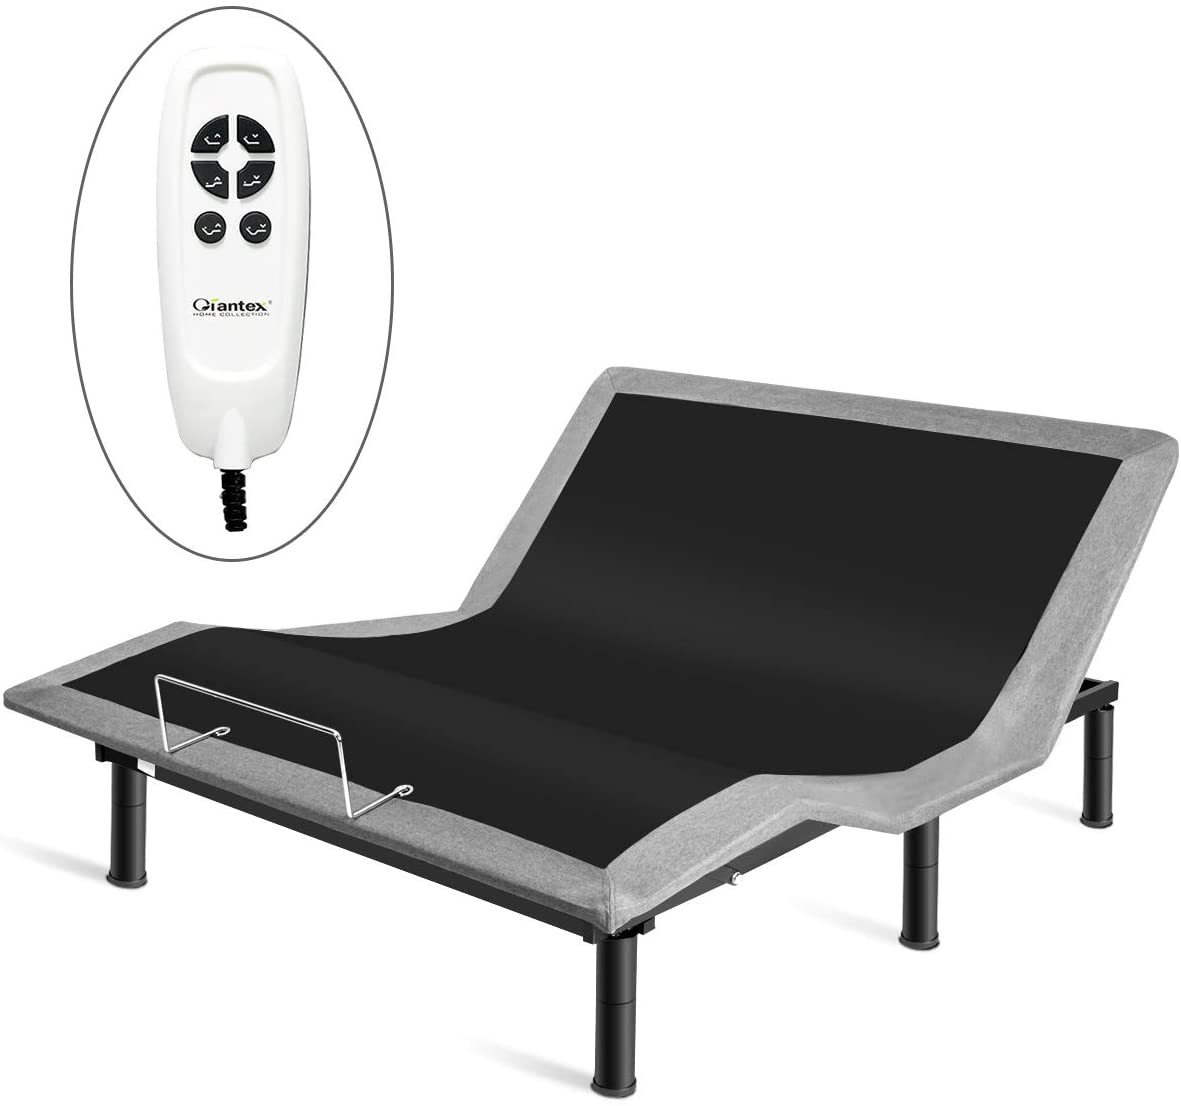 Giantex Basic Adjustable Bed Review